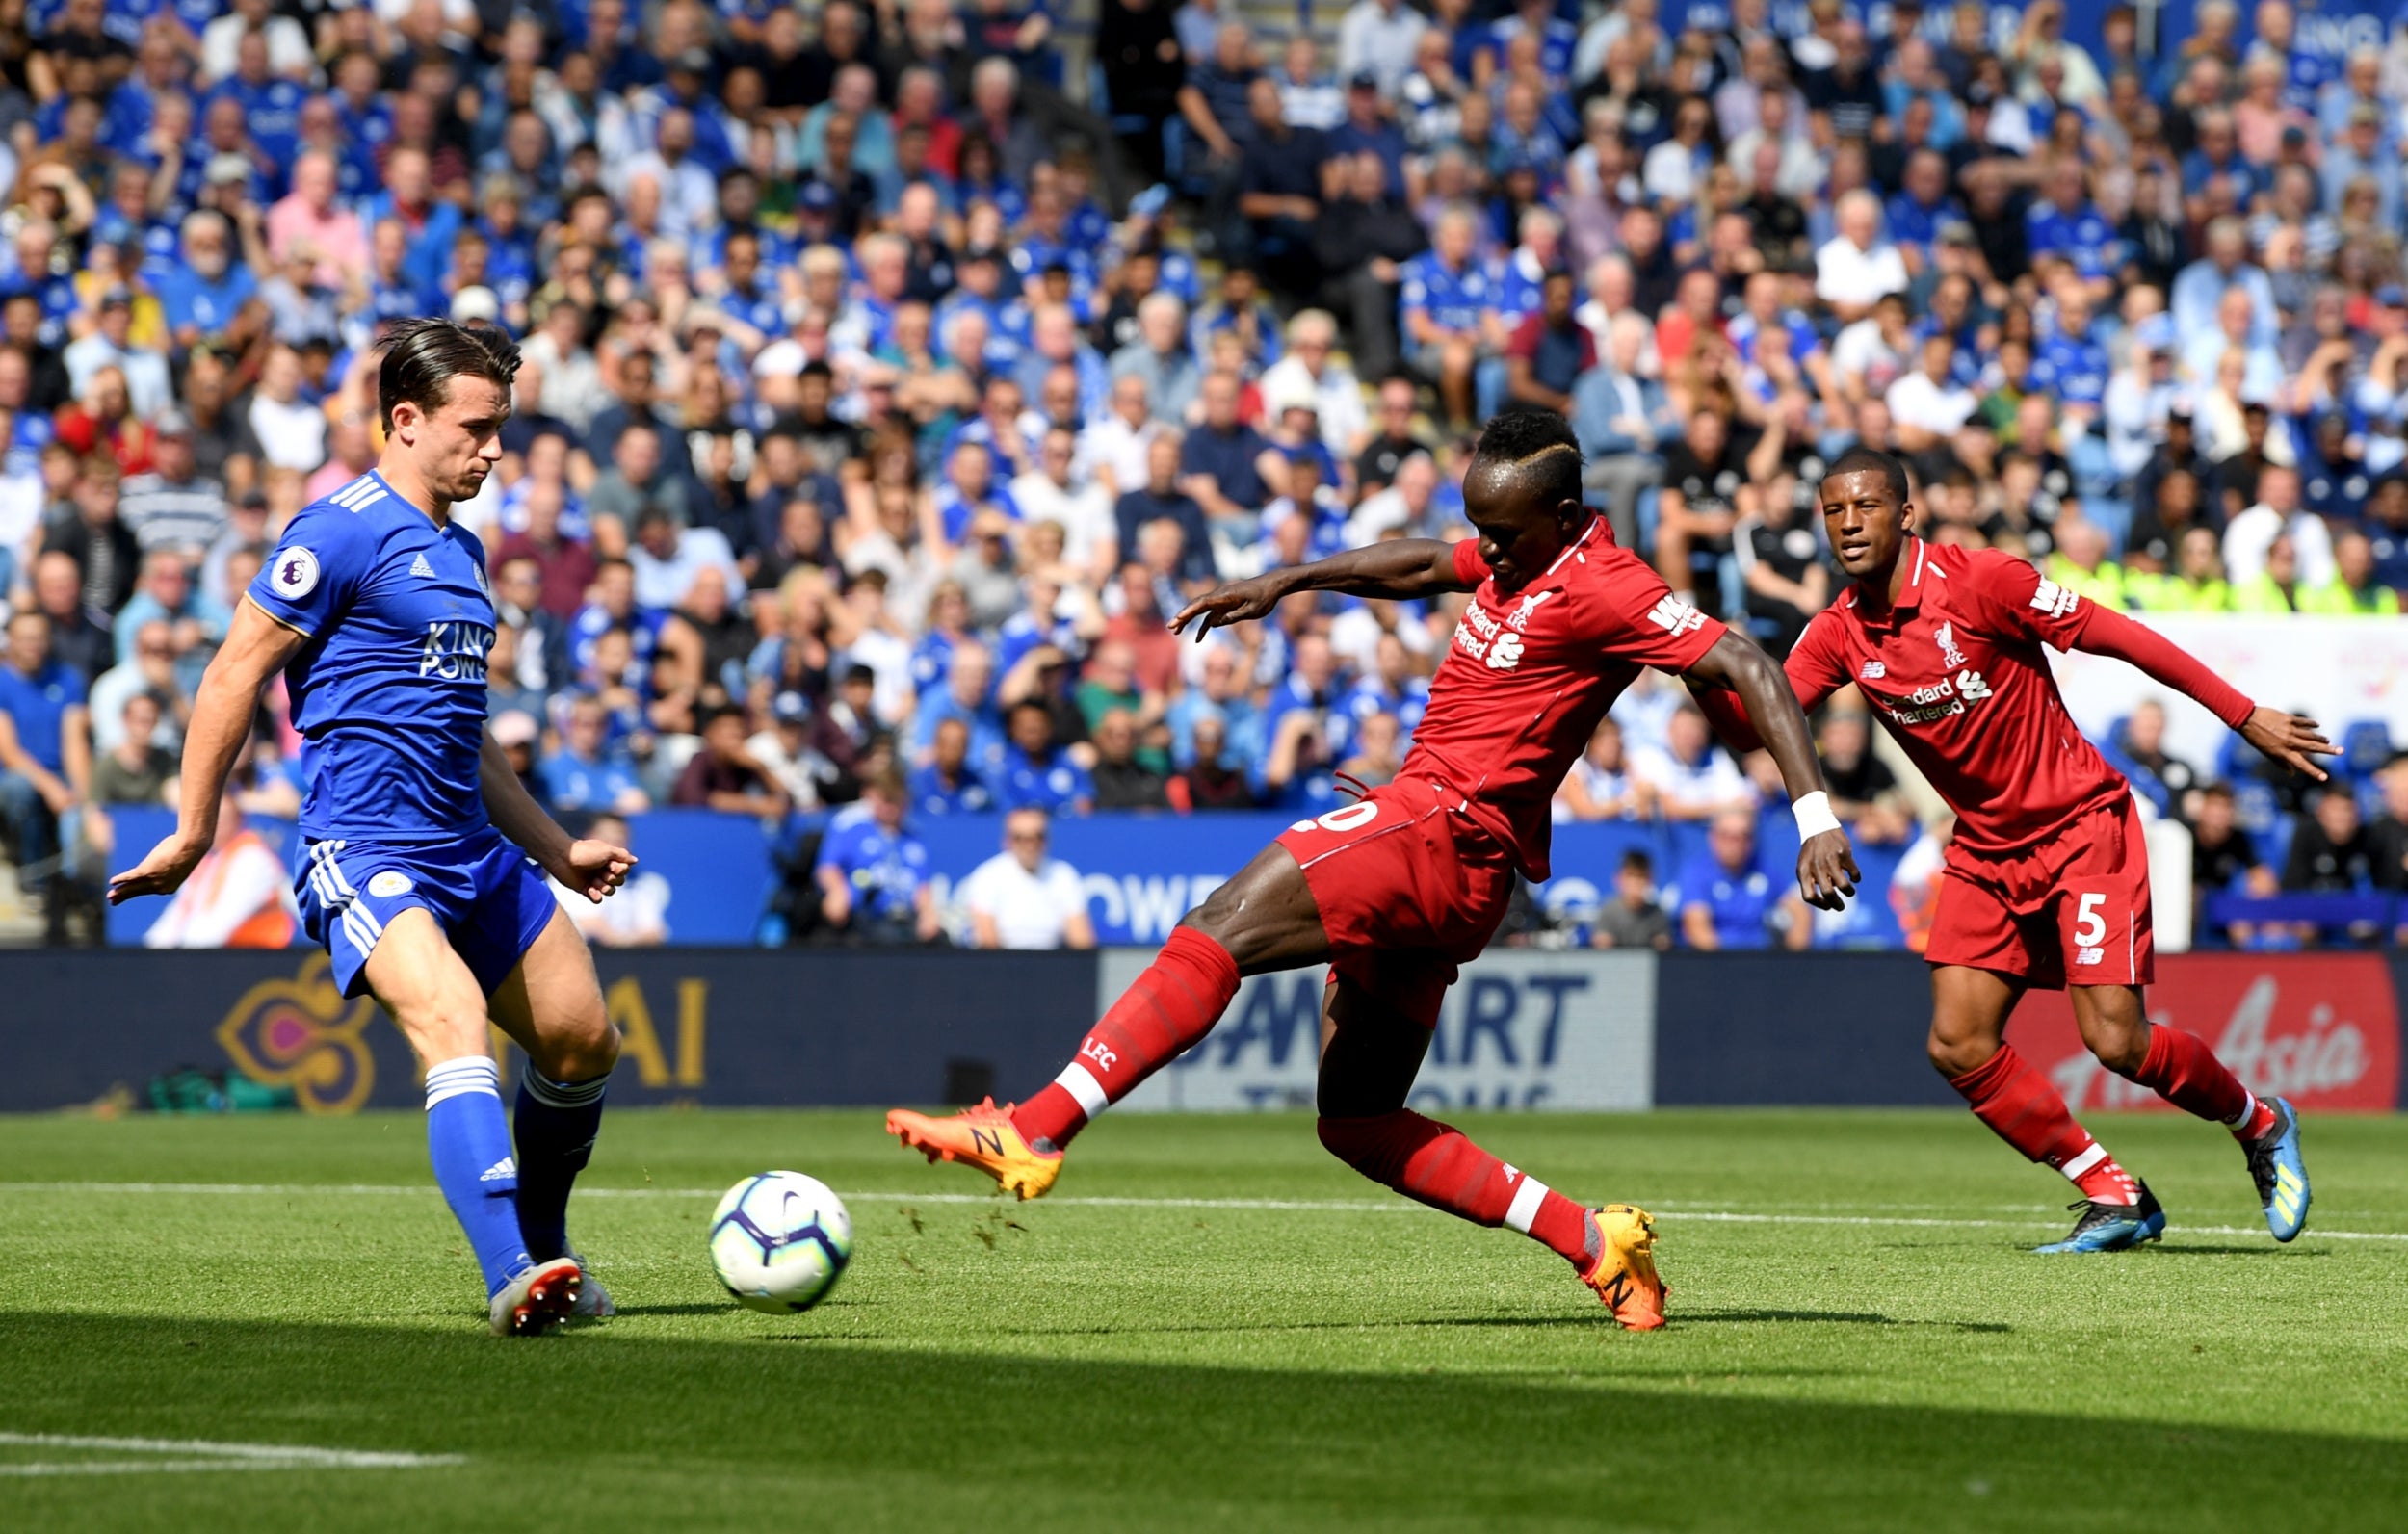 Sadio Mane has been in red-hot form for Liverpool so far